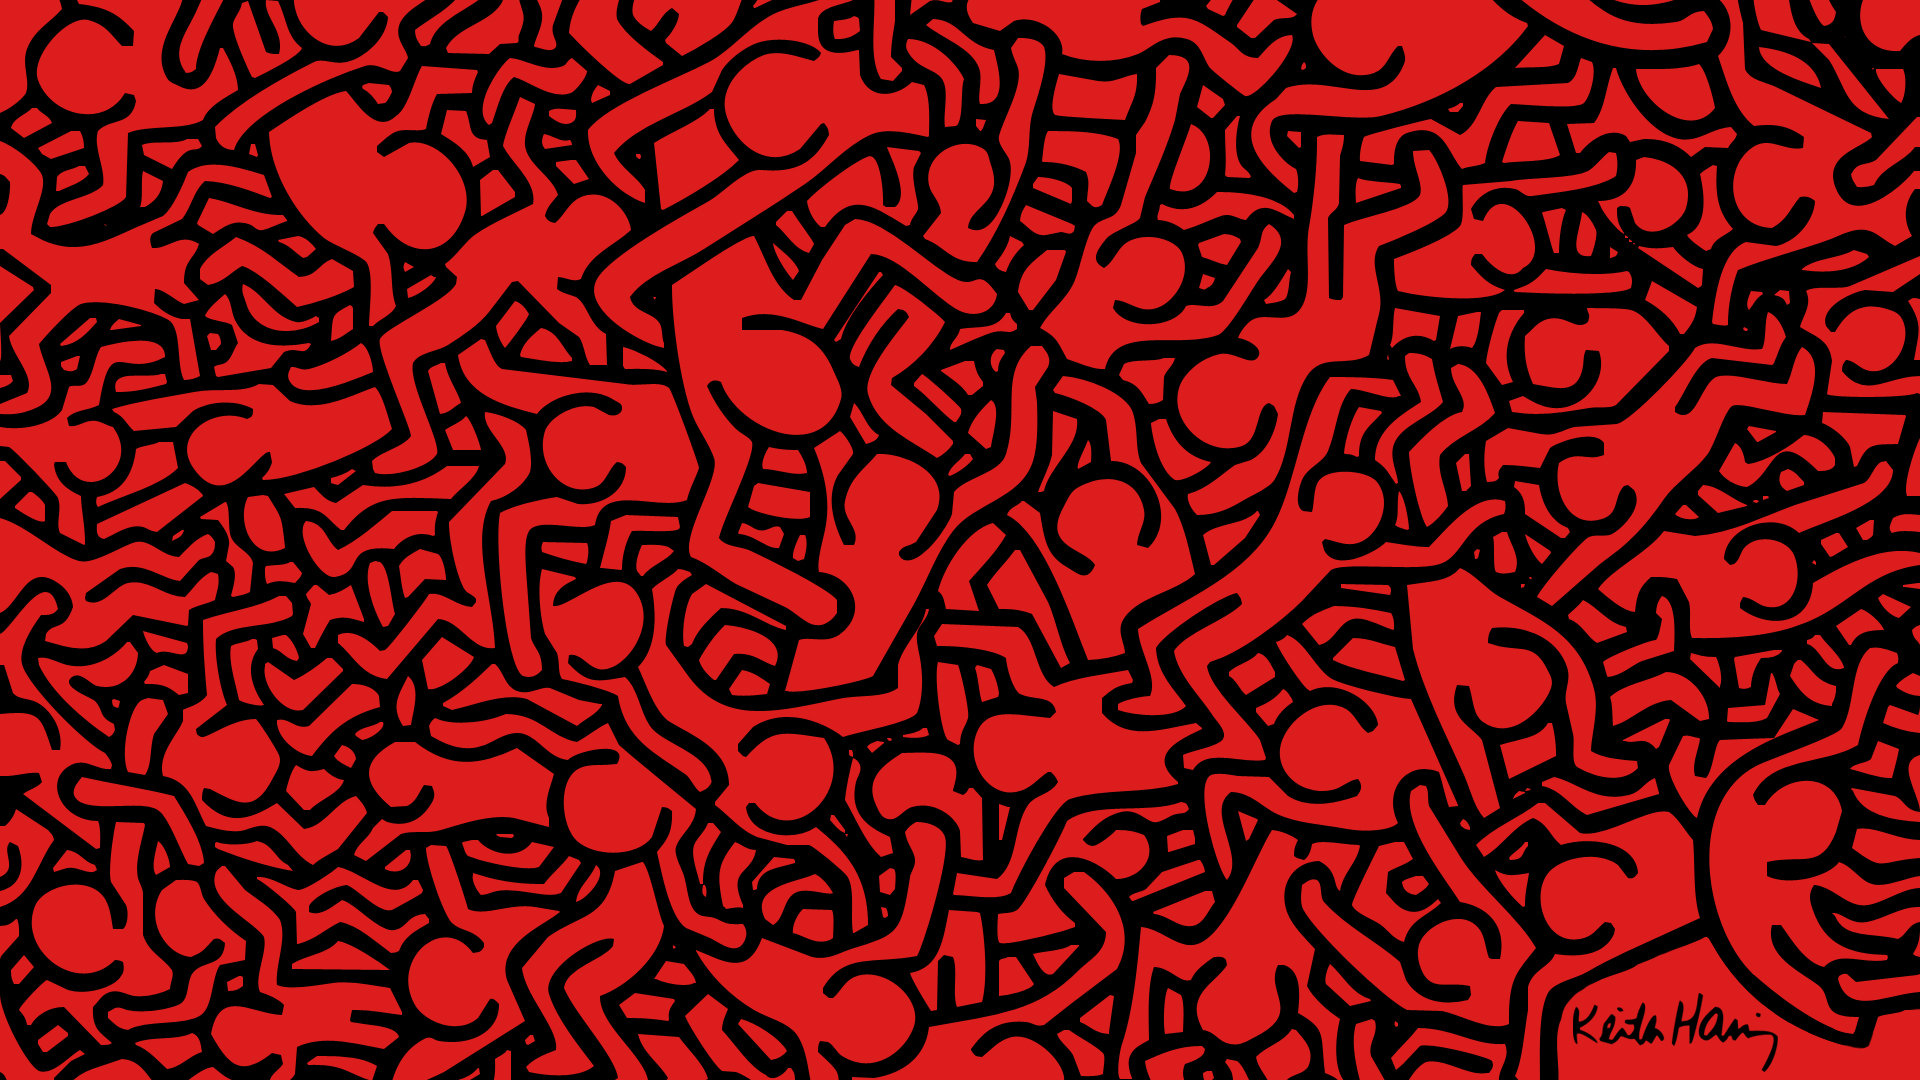 REFERENCES | KEITH HARING | Cozmicflight